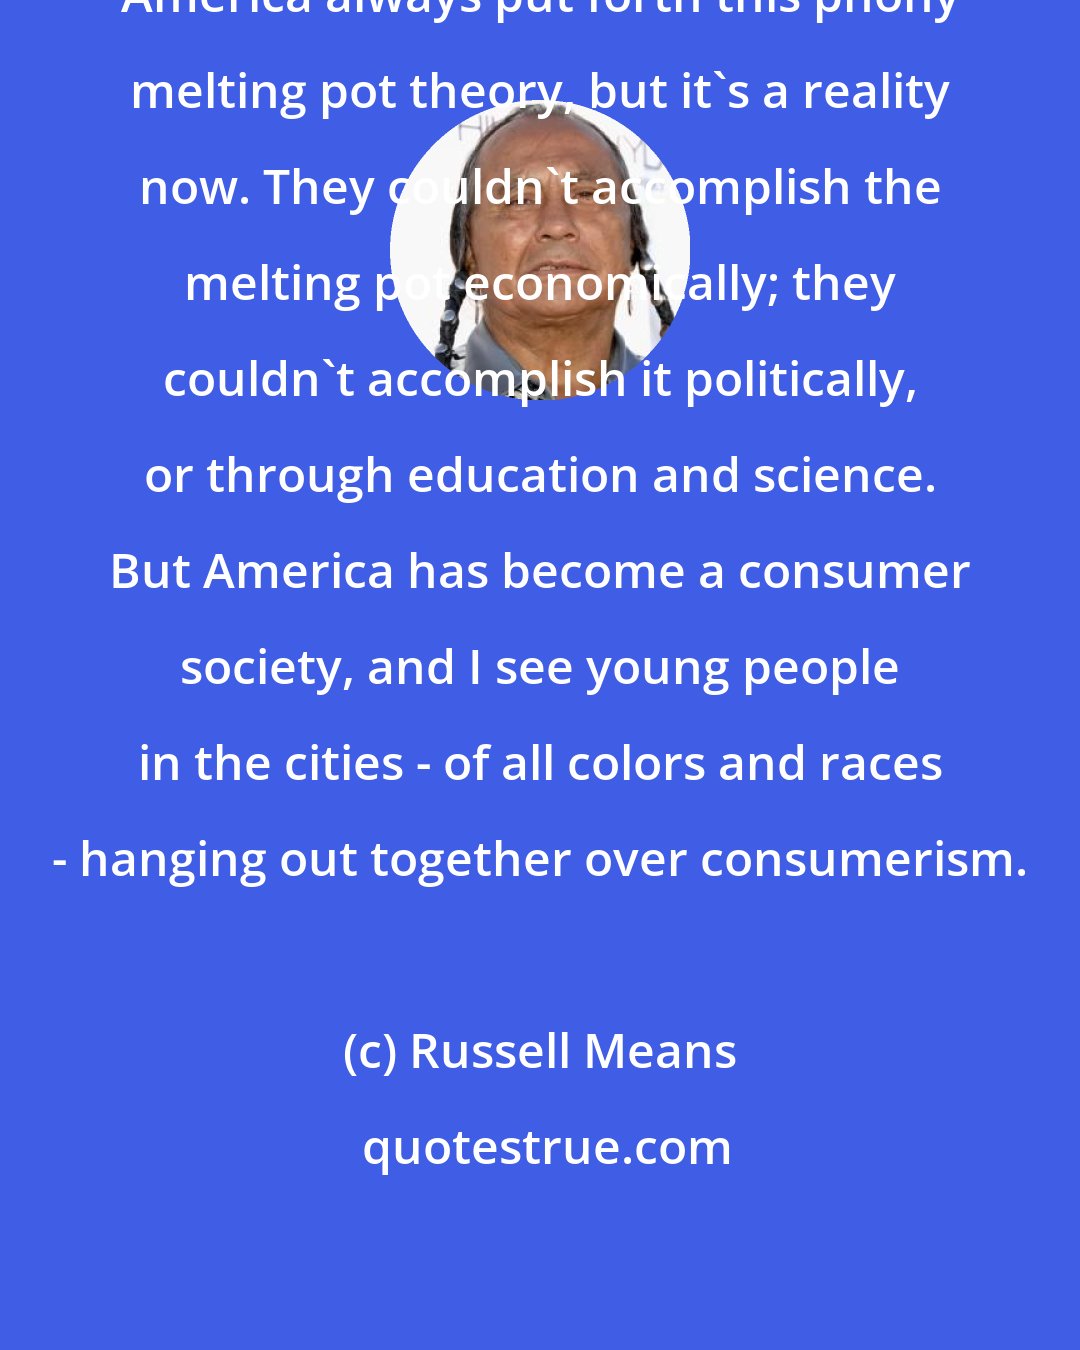 Russell Means: America always put forth this phony melting pot theory, but it's a reality now. They couldn't accomplish the melting pot economically; they couldn't accomplish it politically, or through education and science. But America has become a consumer society, and I see young people in the cities - of all colors and races - hanging out together over consumerism.